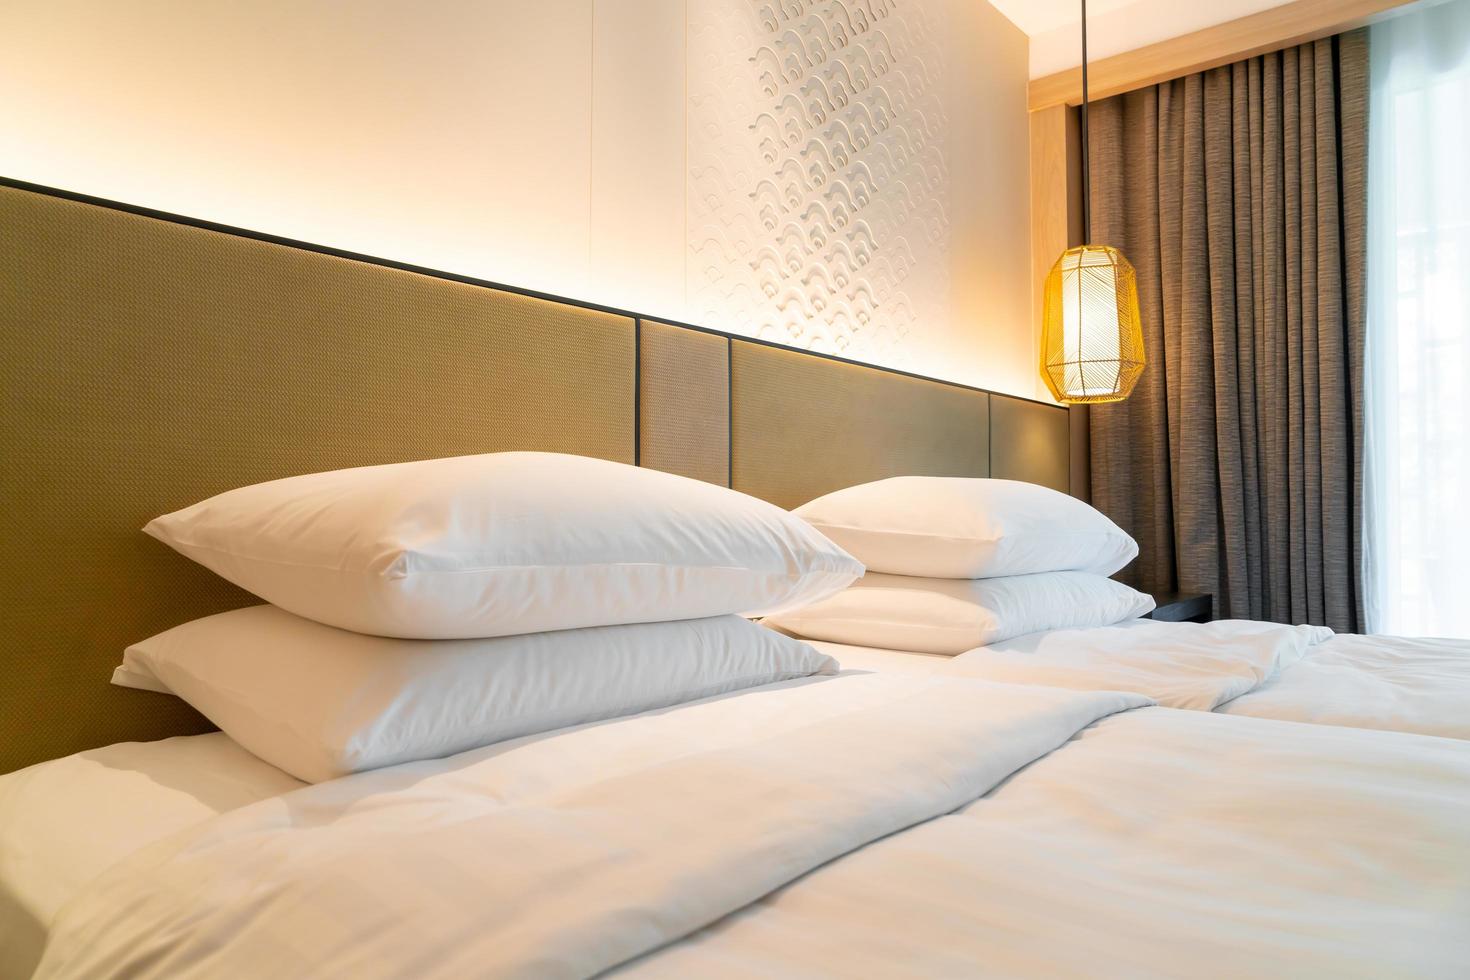 White pillow decoration on the bed in a hotel resort bedroom photo